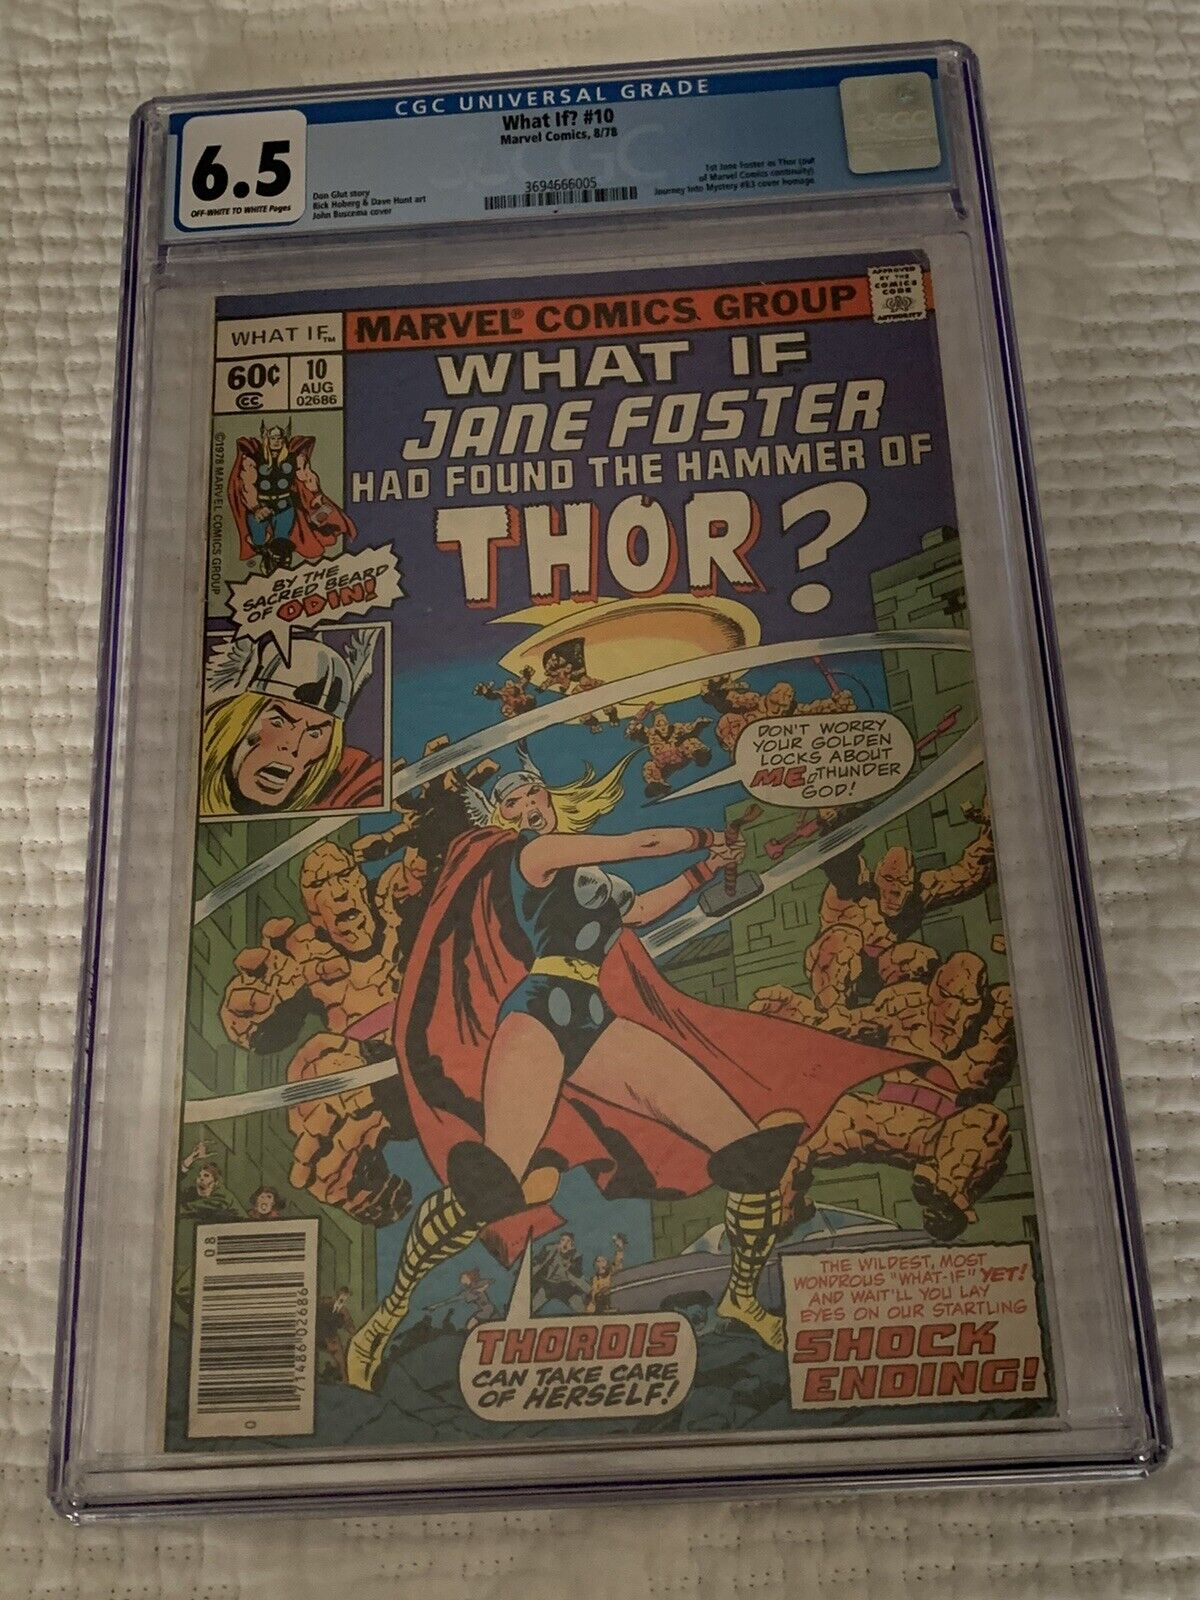 WHAT IF? #10 (’78)  CGC 6.5, white pages - What If Jane Foster Was Thor?